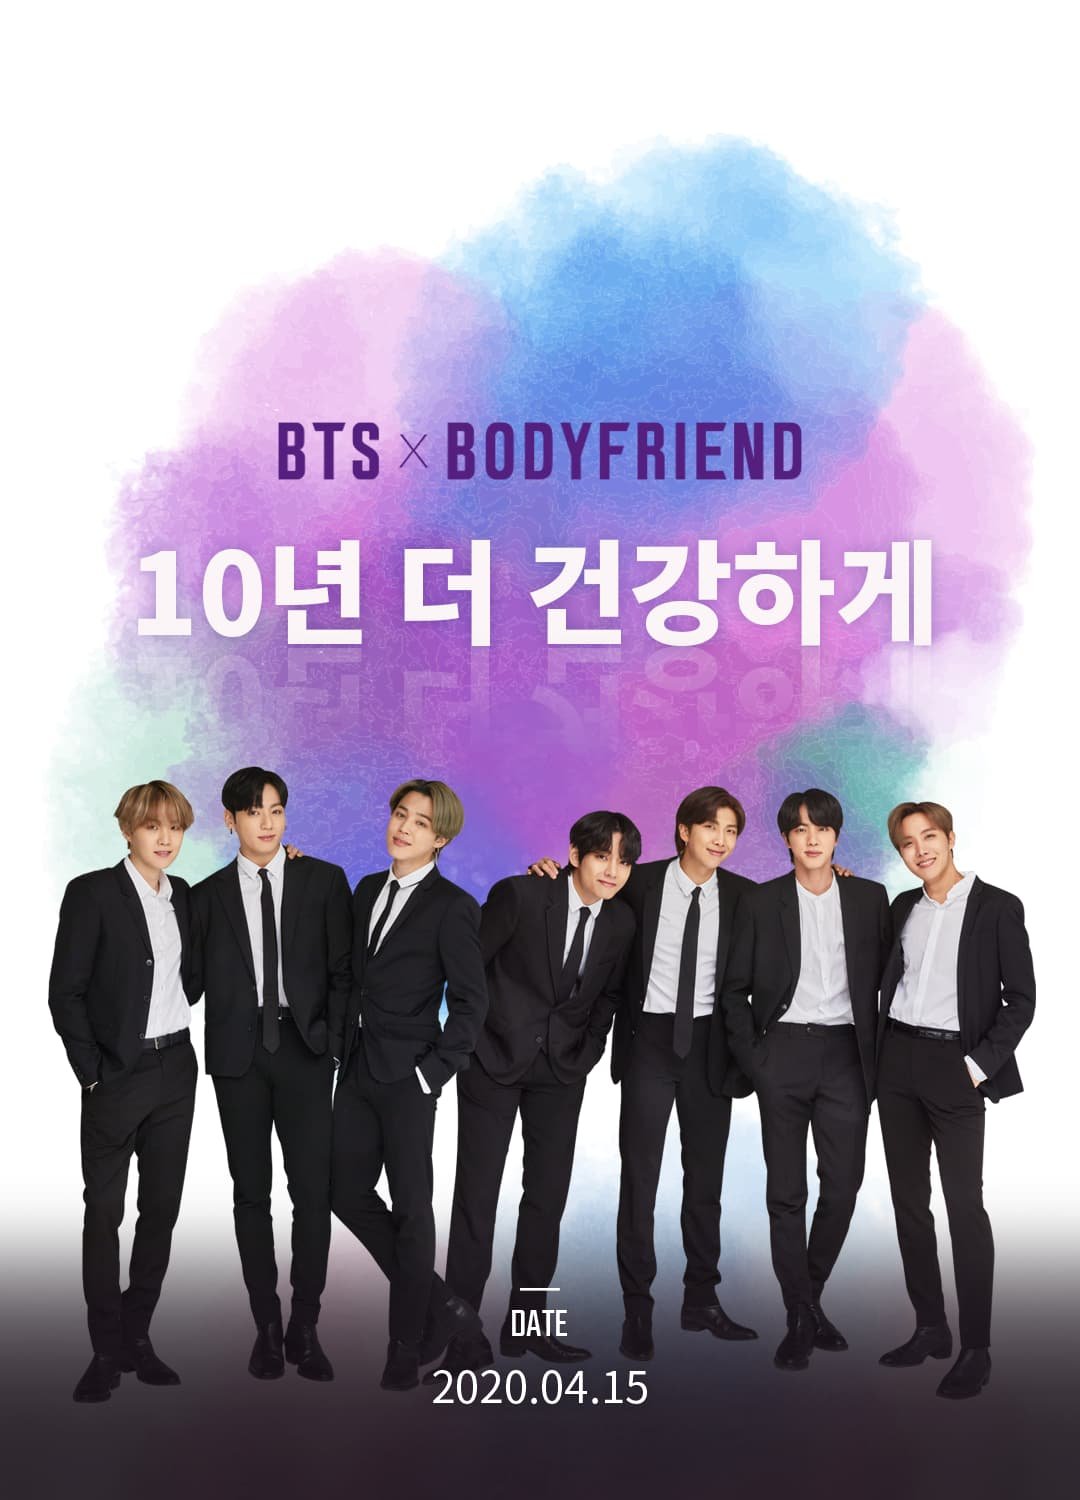 Bodyfriend, which is a Model of BTS, has Sold 954 Units on Parents' Day